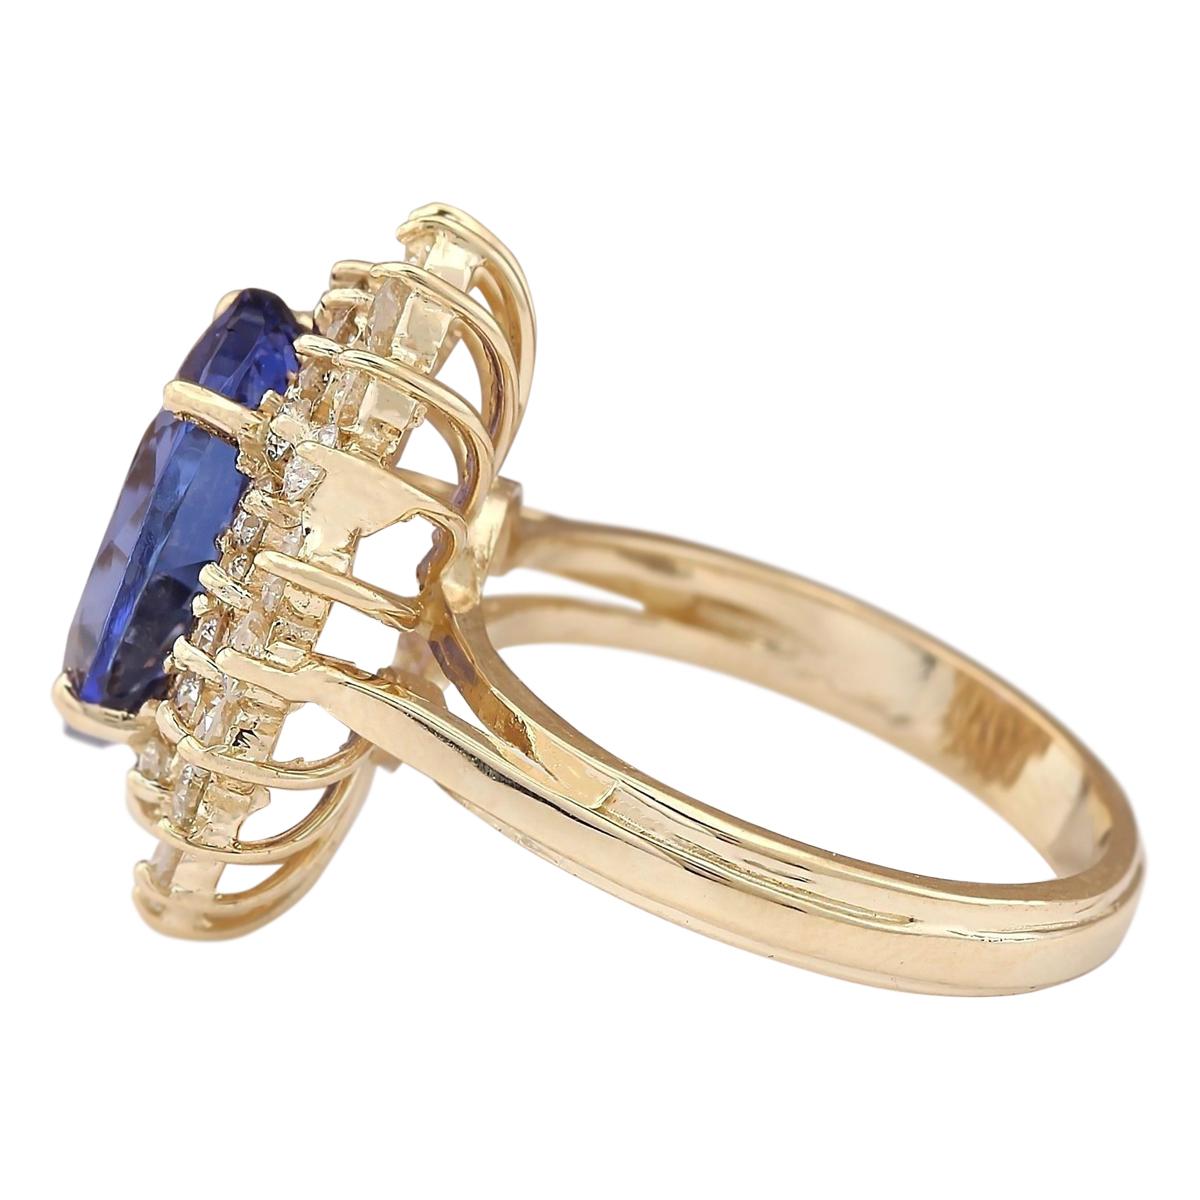 Elevate your look with our exquisite 7.22 Carat Tanzanite 14 Karat Yellow Gold Diamond Ring. Crafted from stamped 14K yellow gold, this ring boasts a total weight of 7.2 grams, ensuring both elegance and durability. The centerpiece is a mesmerizing